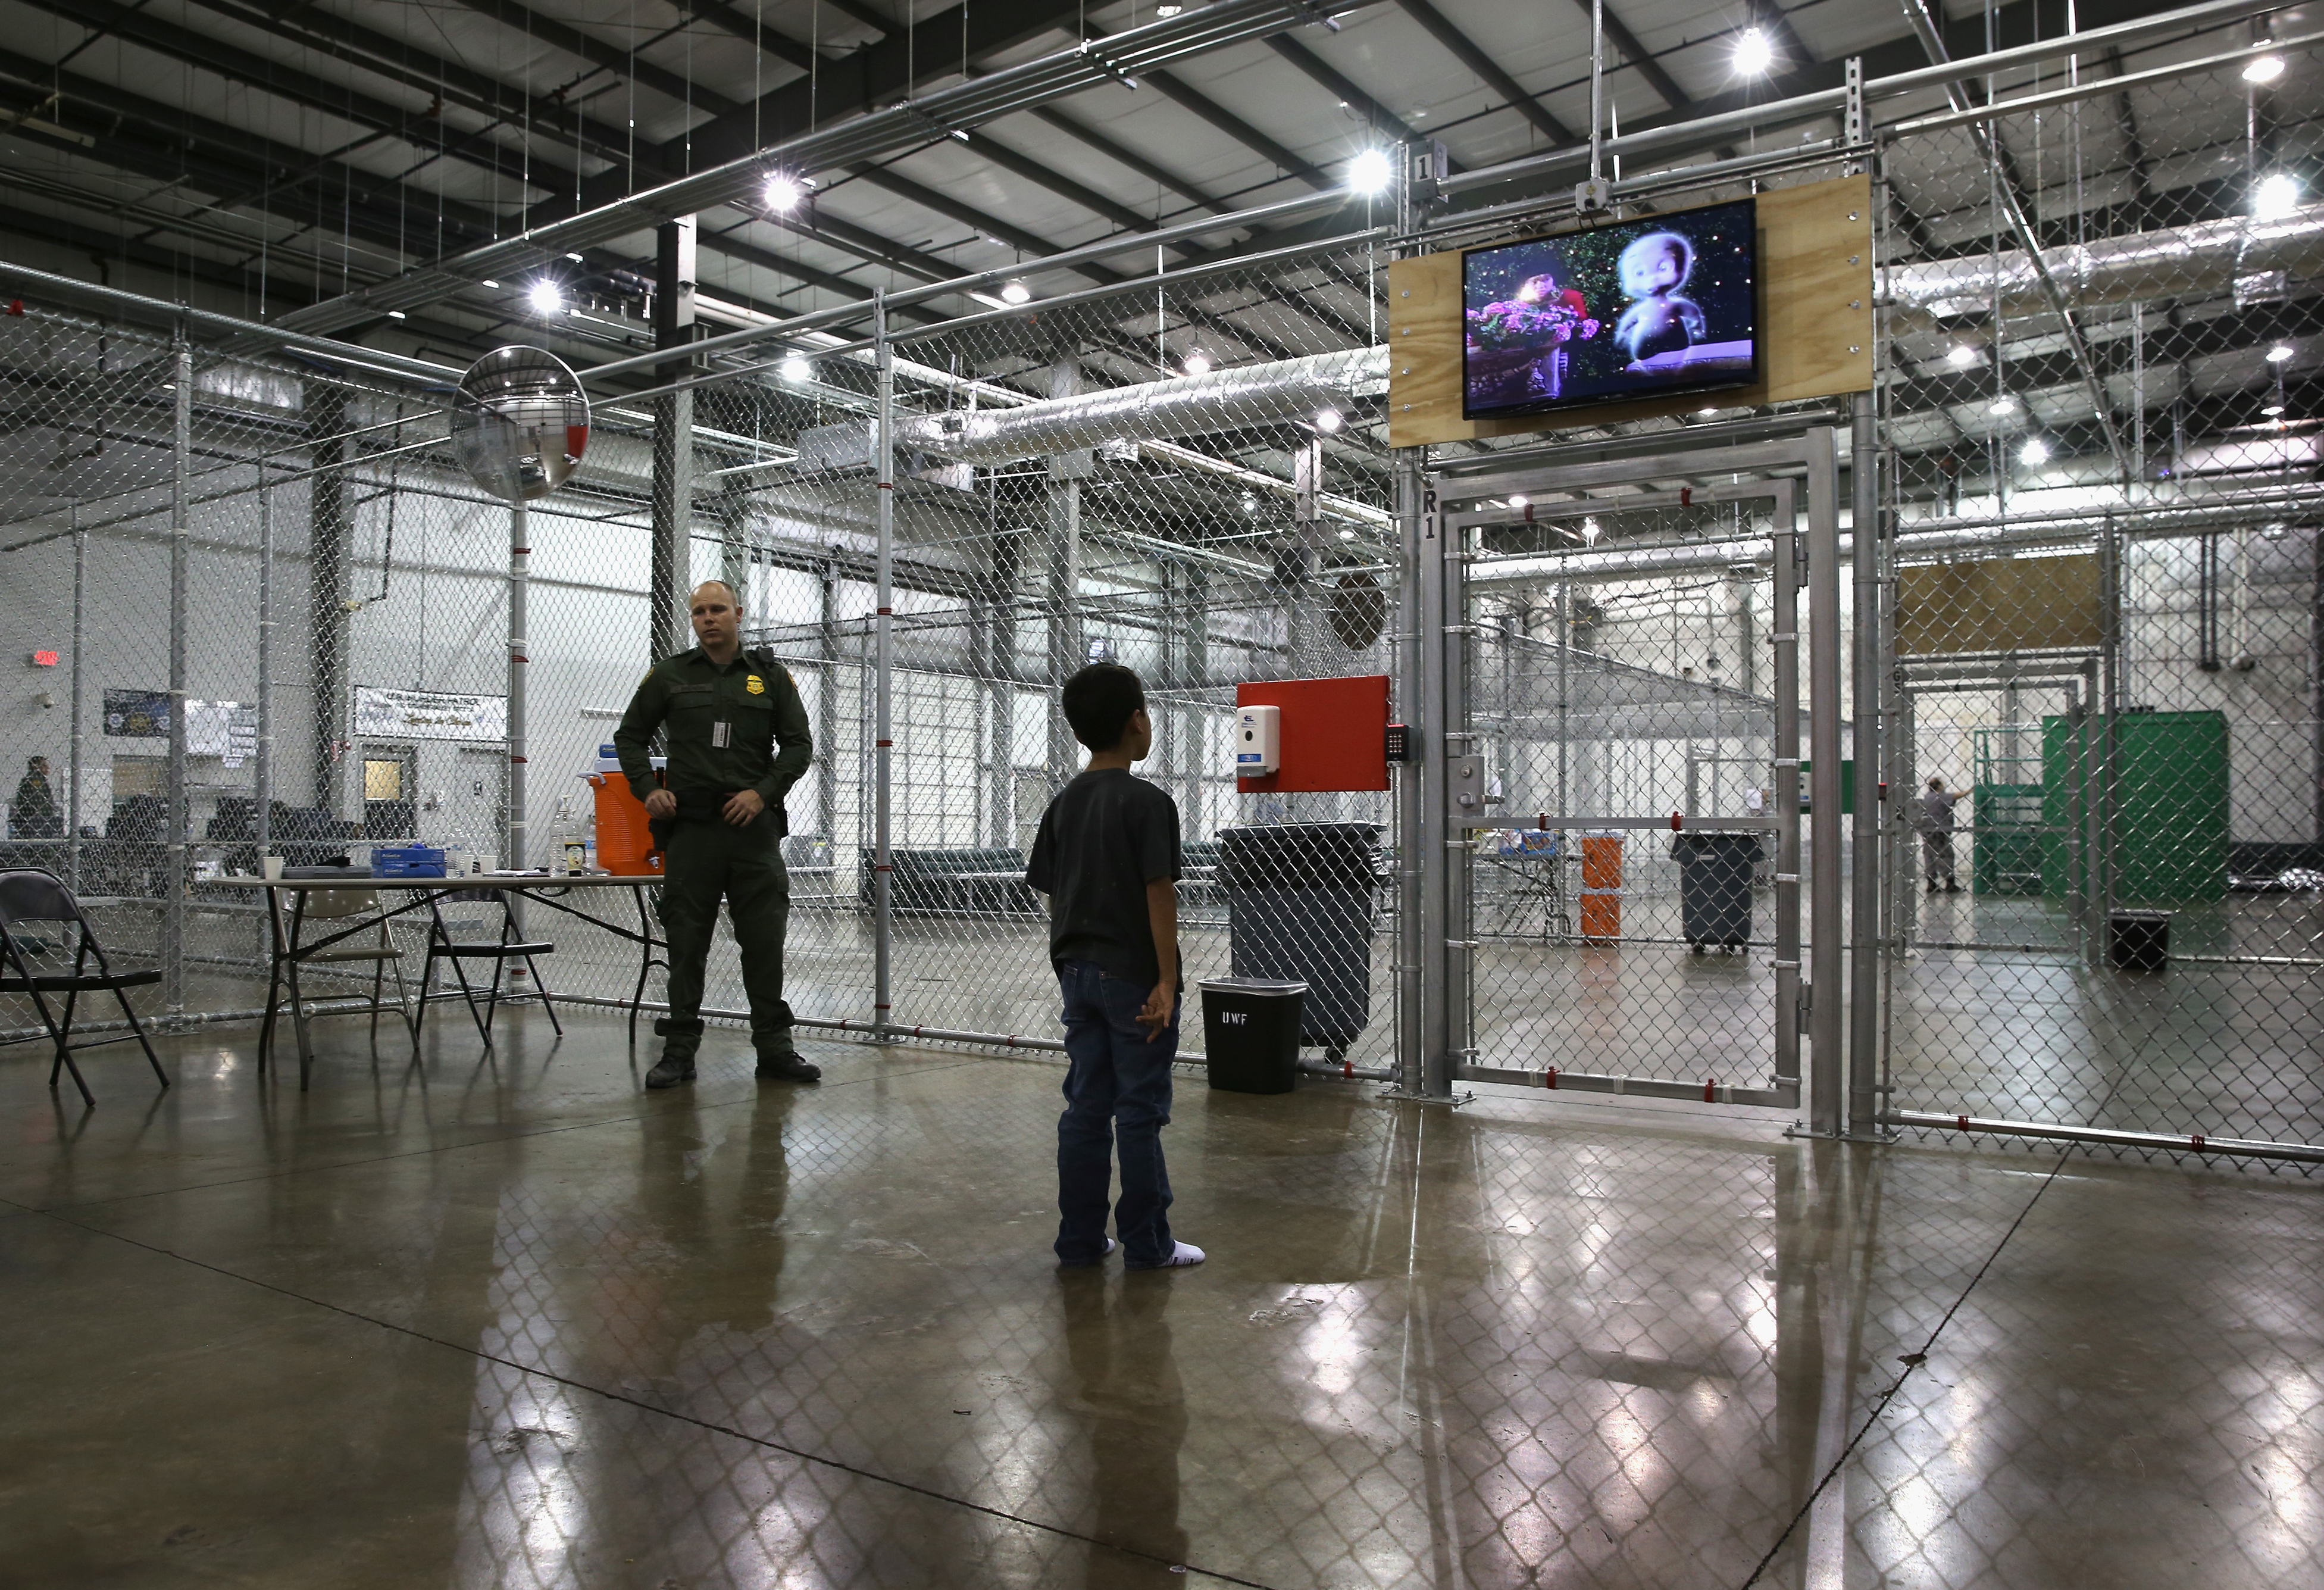 A boy from Honduras watches a movie at a detention facility run by the U.S. Border Patrol in McAllen, Tex. on Sept. 8, 2014. (John Moore—Getty Images)